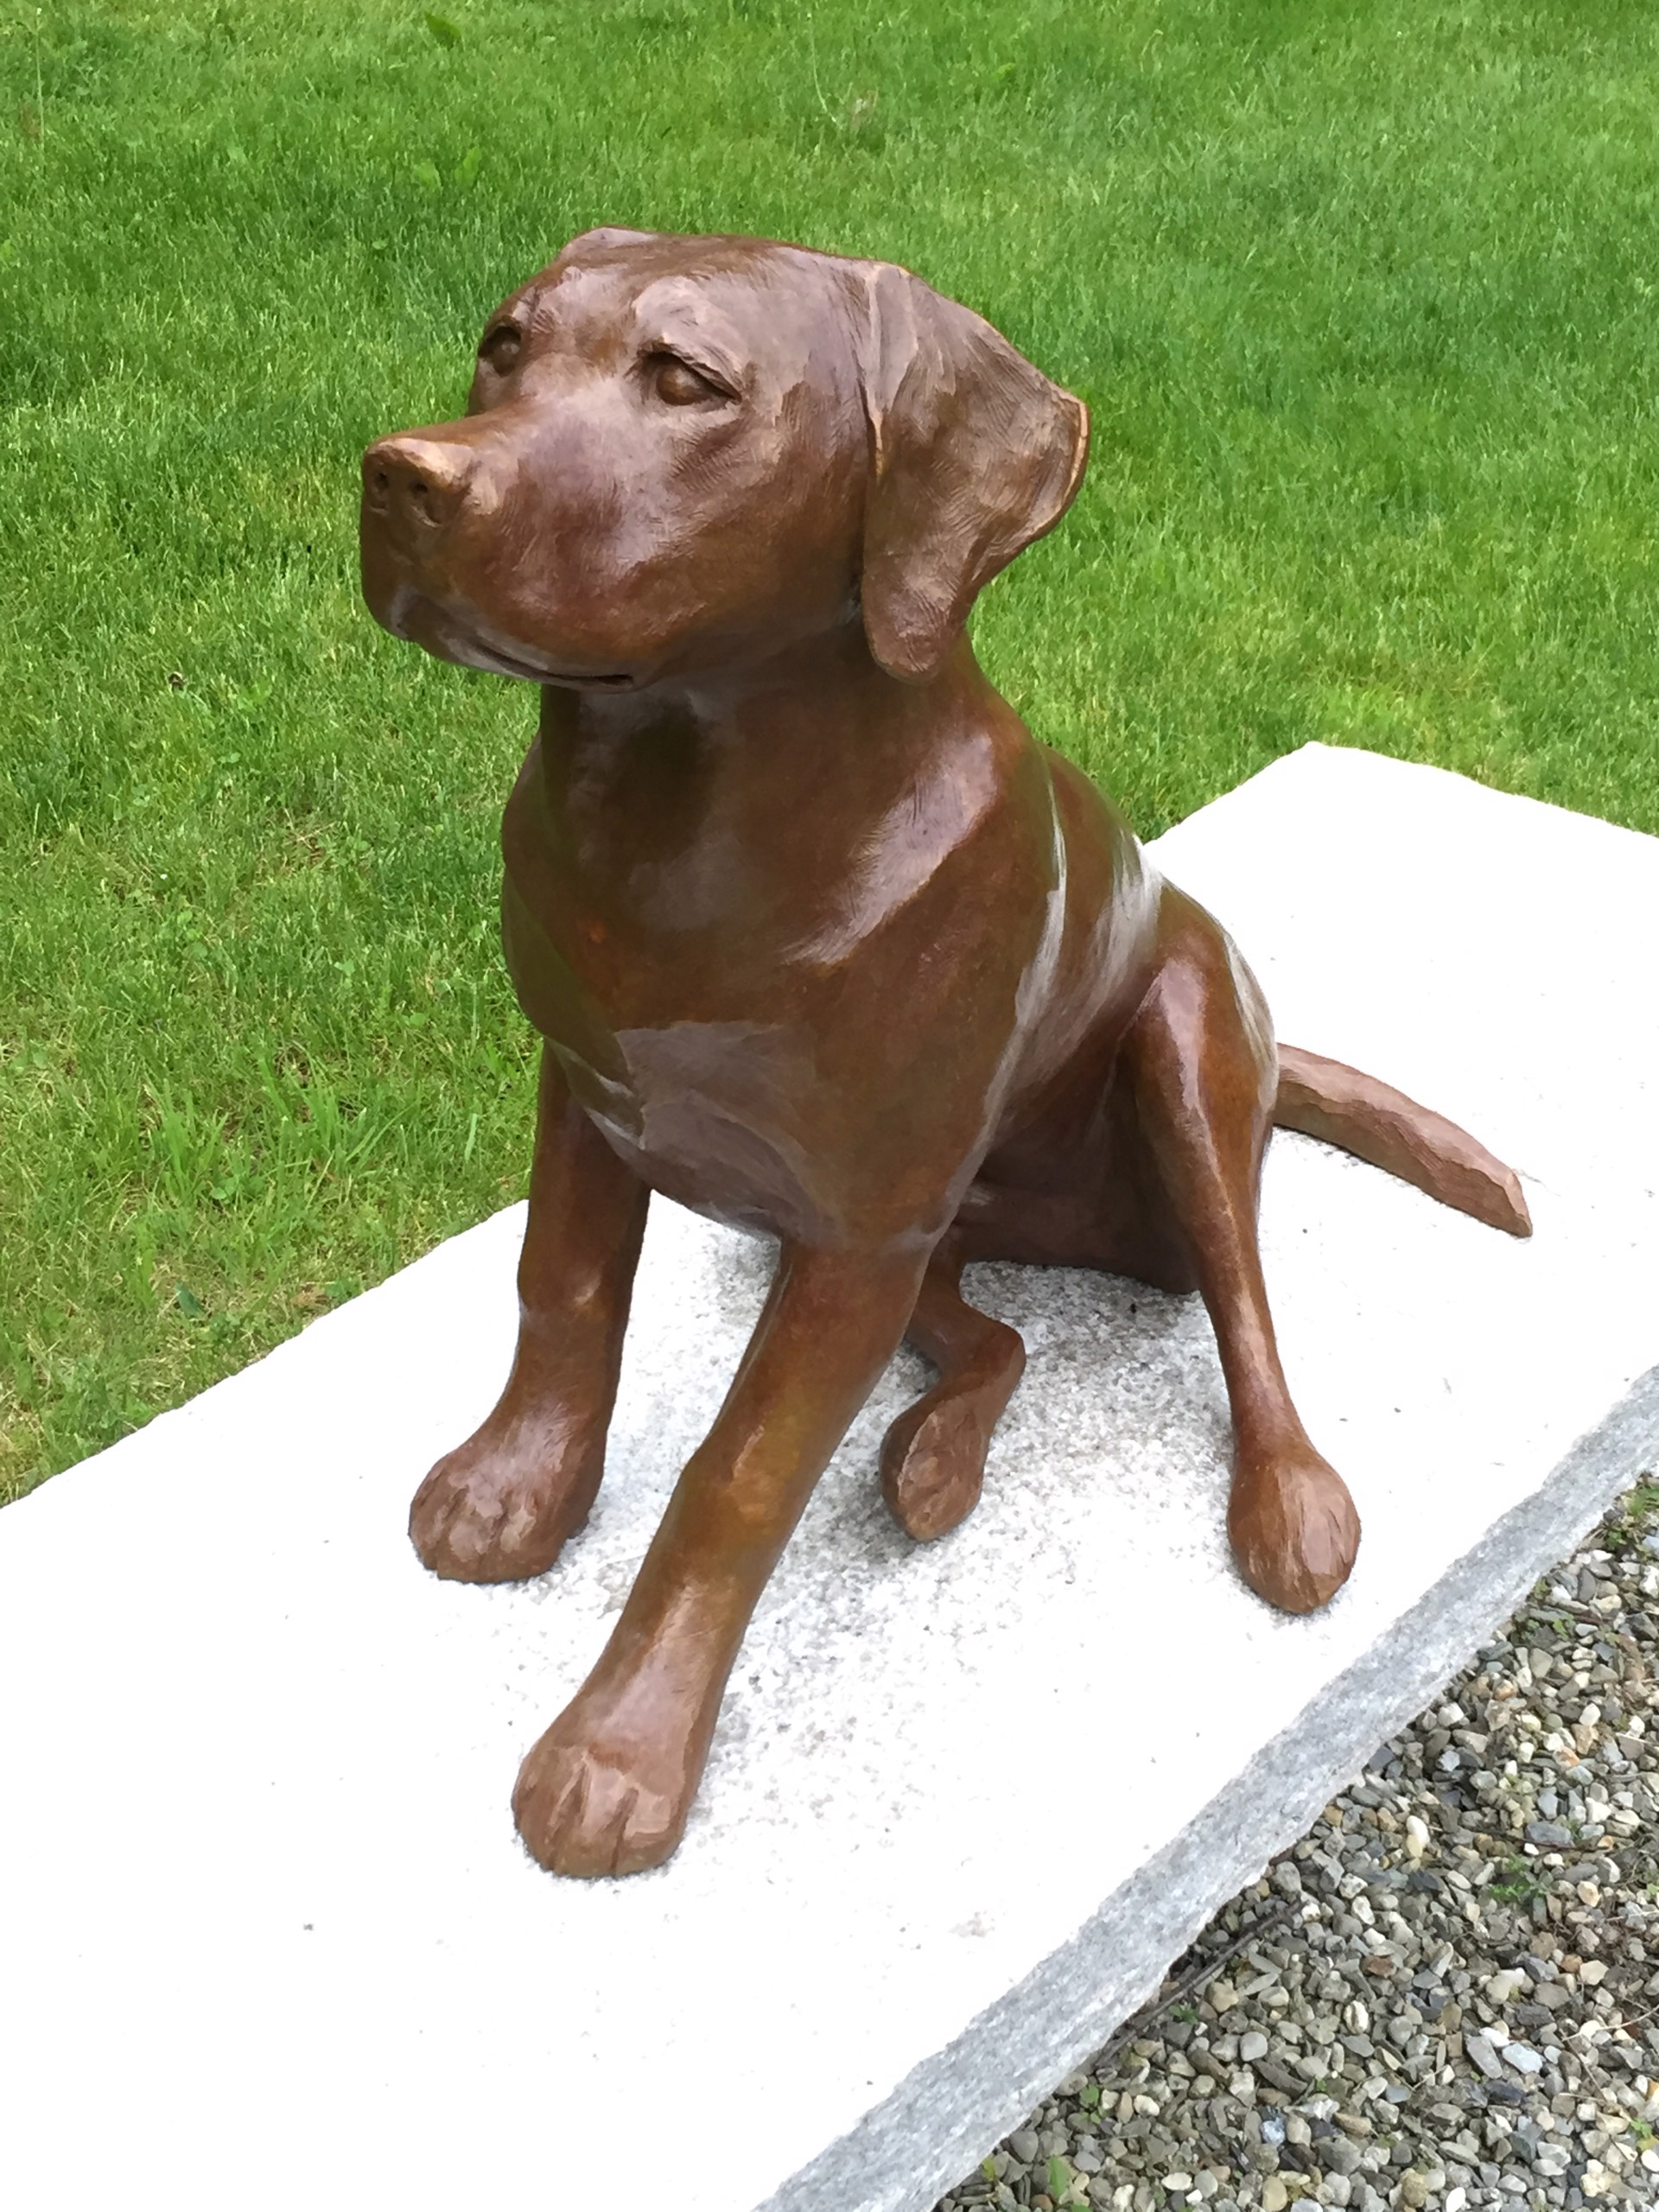 Seated Puppy, "Yes, I Know" by Dan Murray